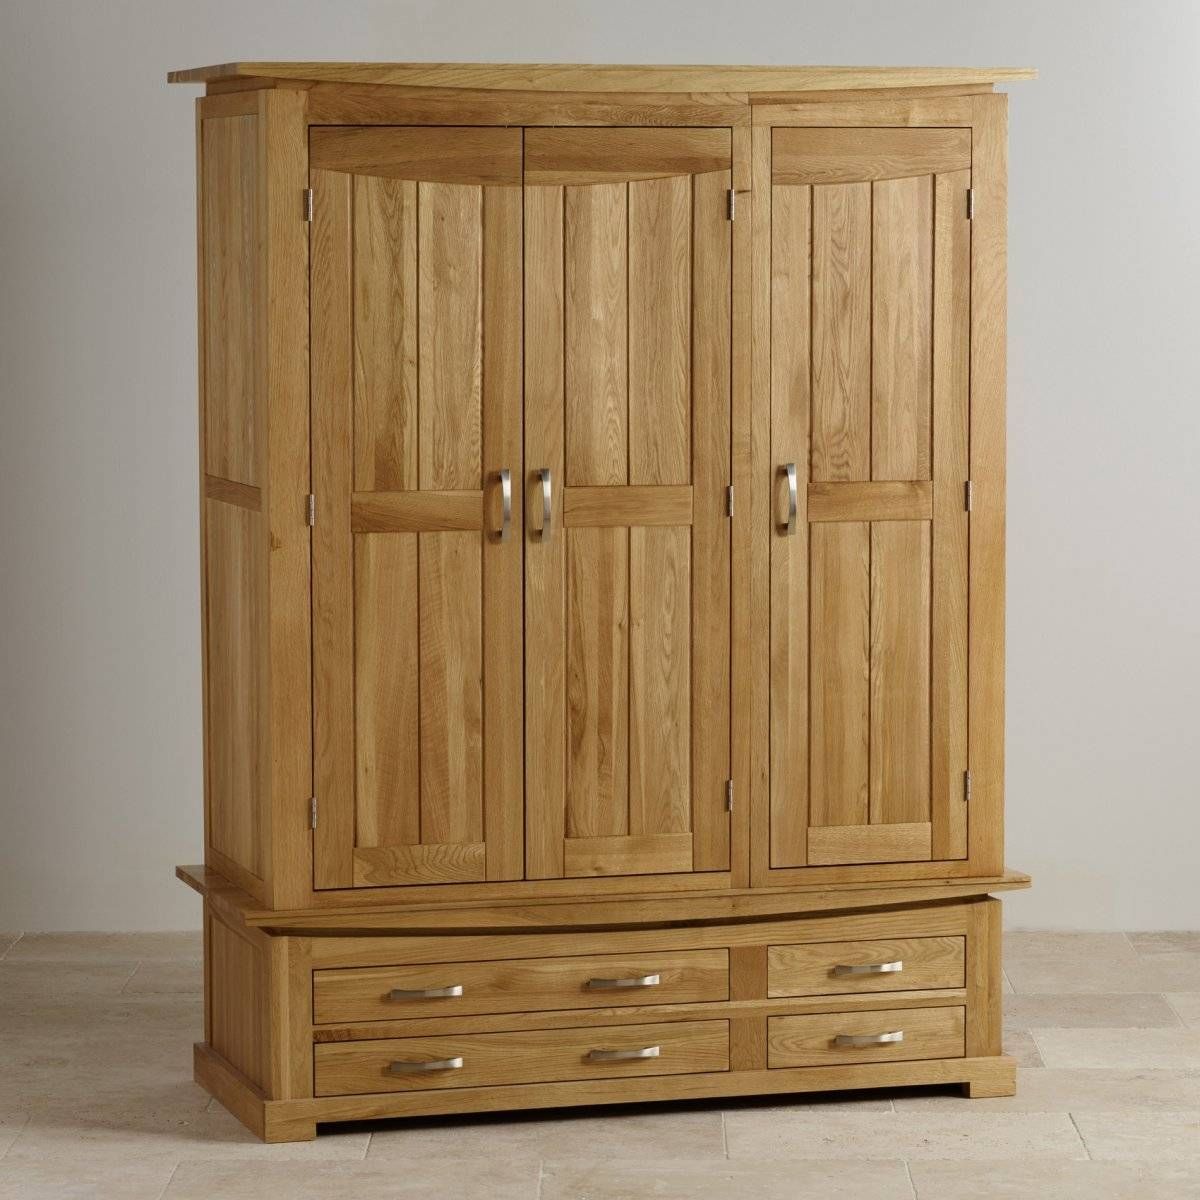 Solid Hardwood Wardrobes | Finance Available | Oak Furniture Land Within Oak Wardrobes (View 14 of 15)